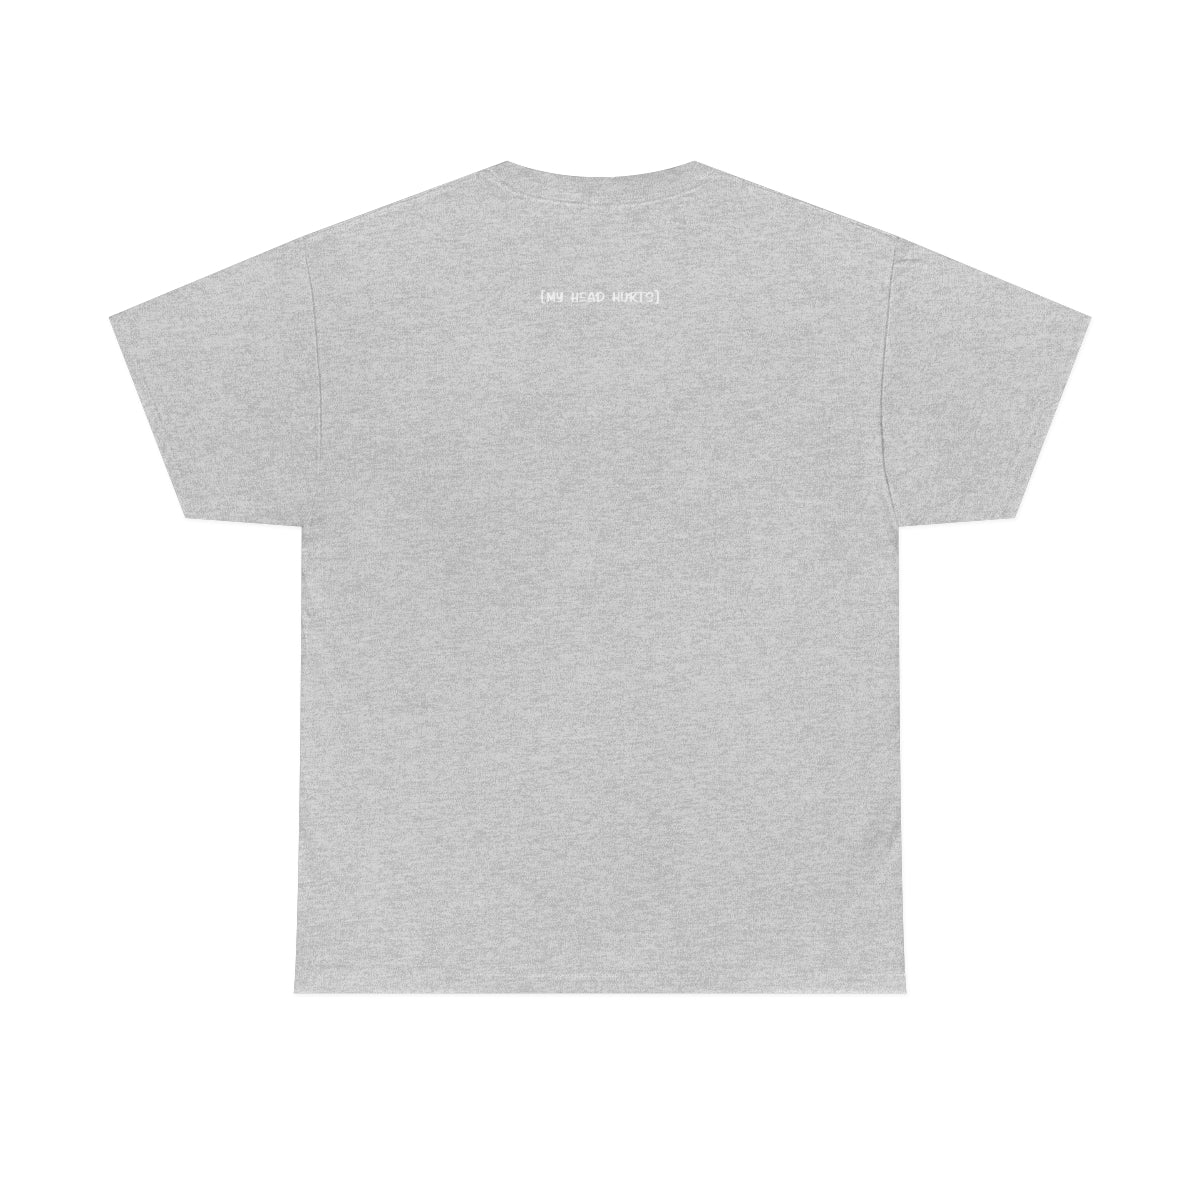 [My head Hurts] Heavy Cotton Between the Lines T-Shirt